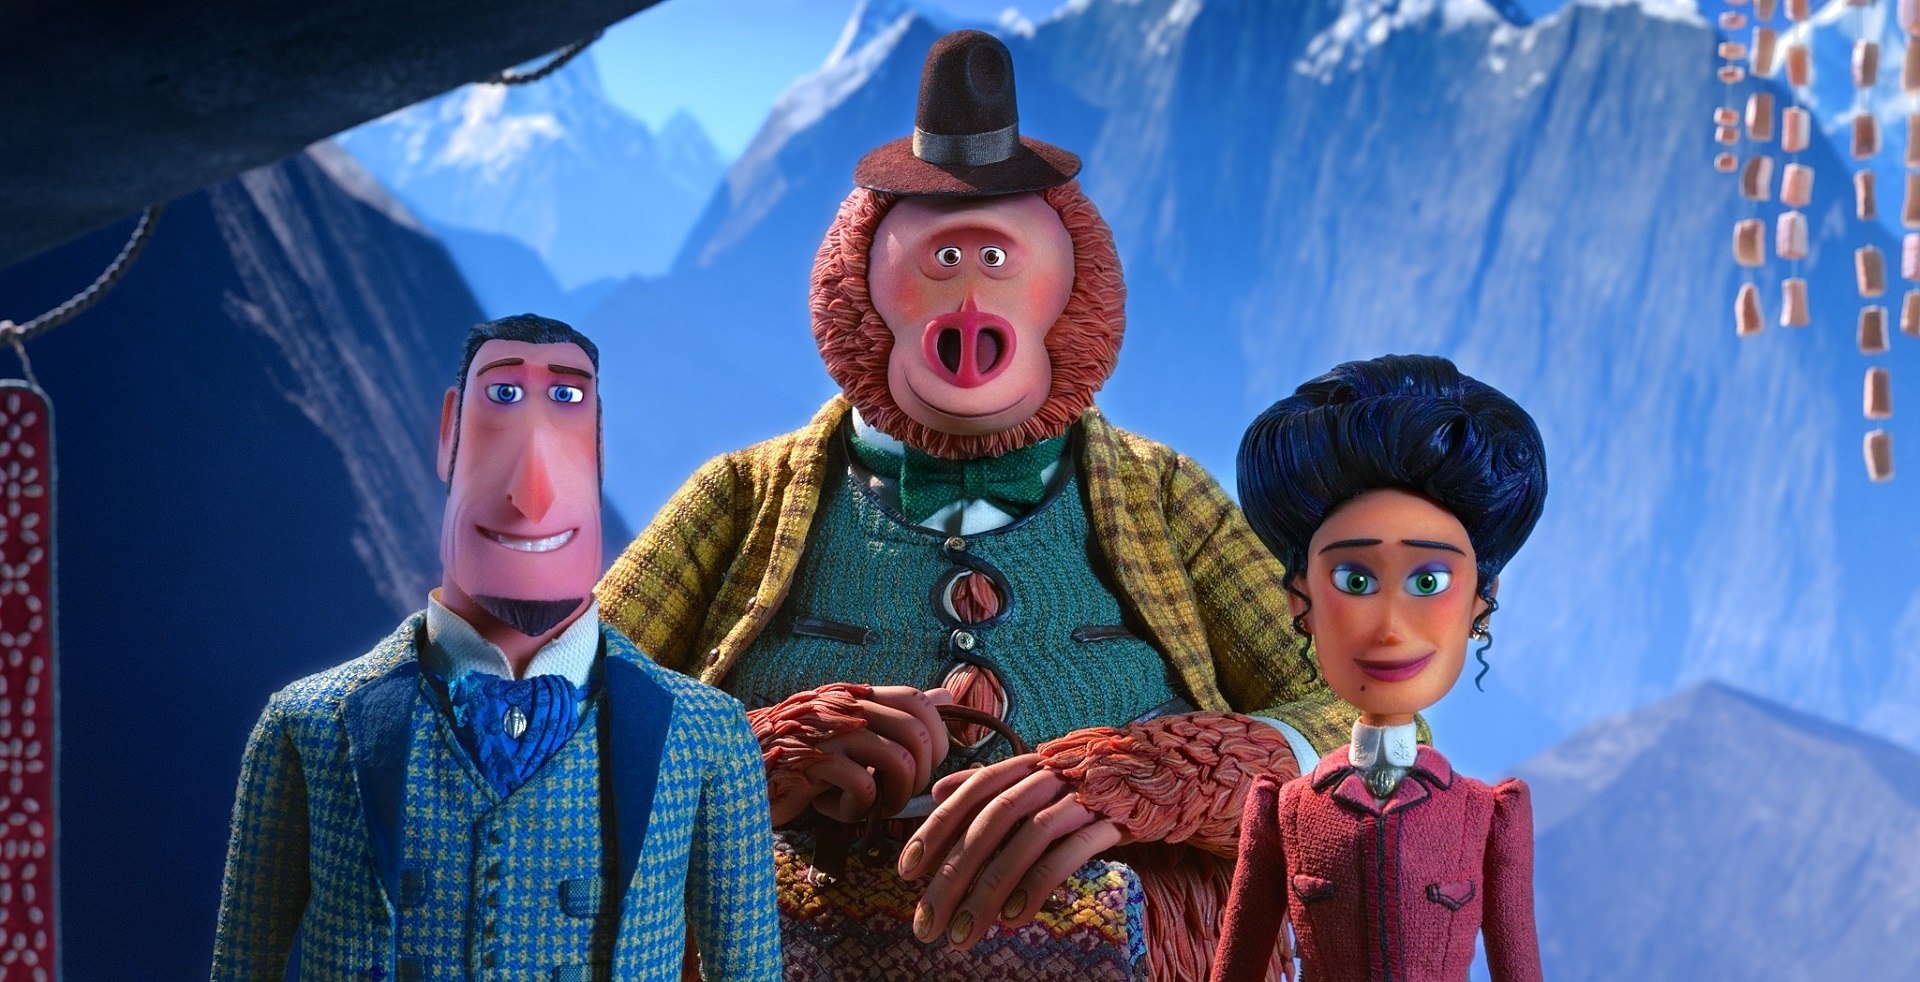 Missing Link is one of the best animated movies of 2019